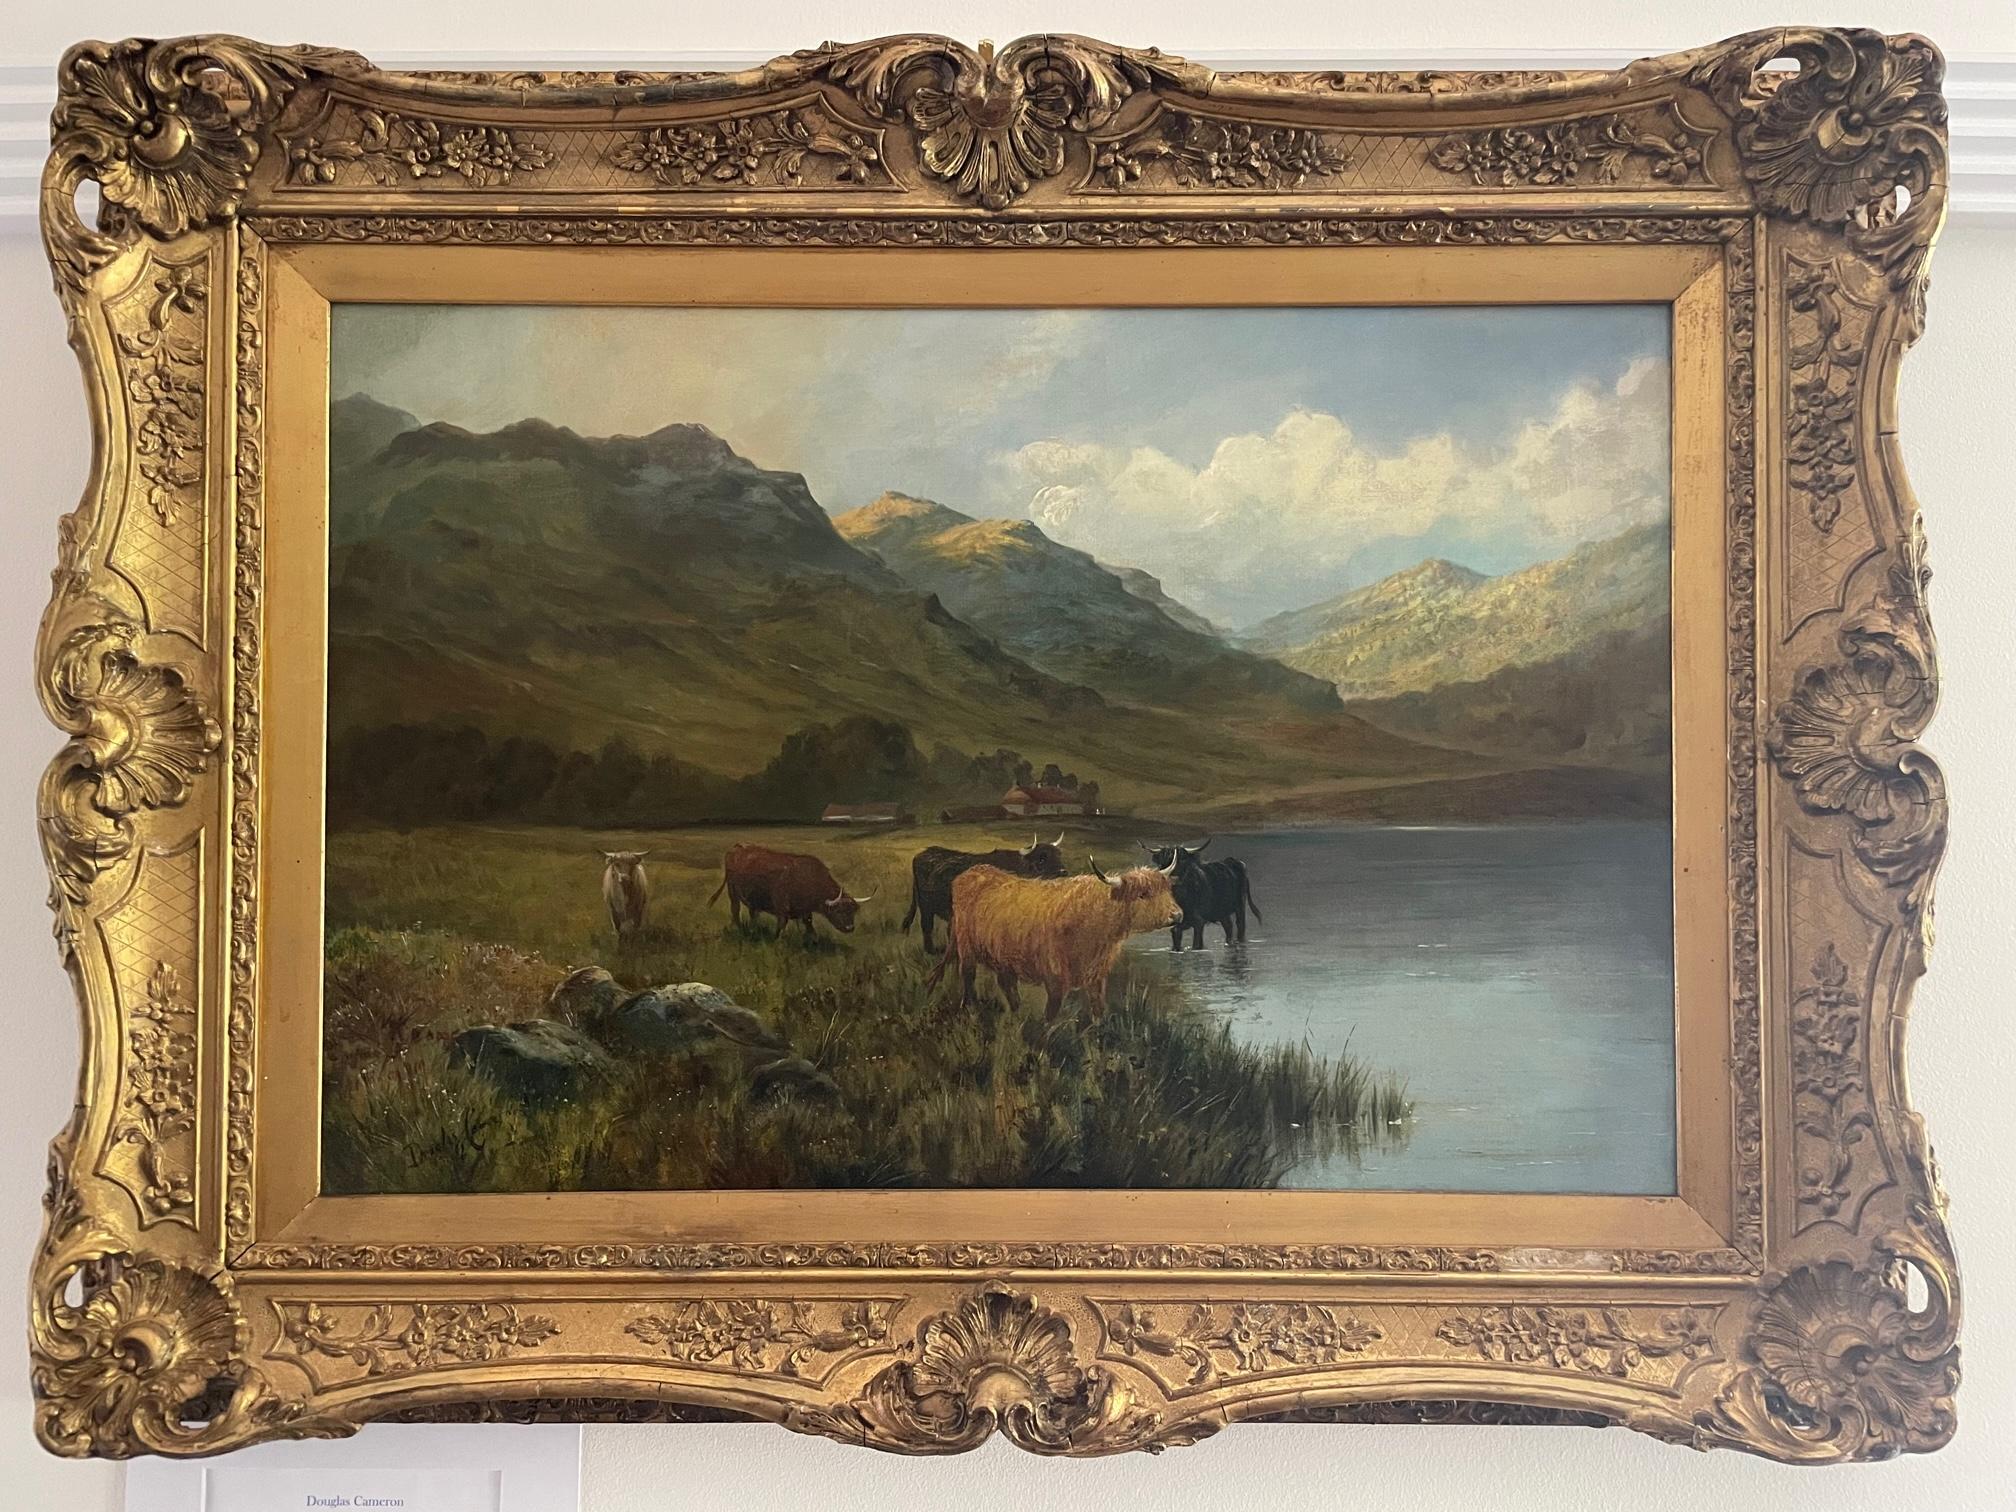 Highland Cattle Painting - 97 For Sale on 1stDibs